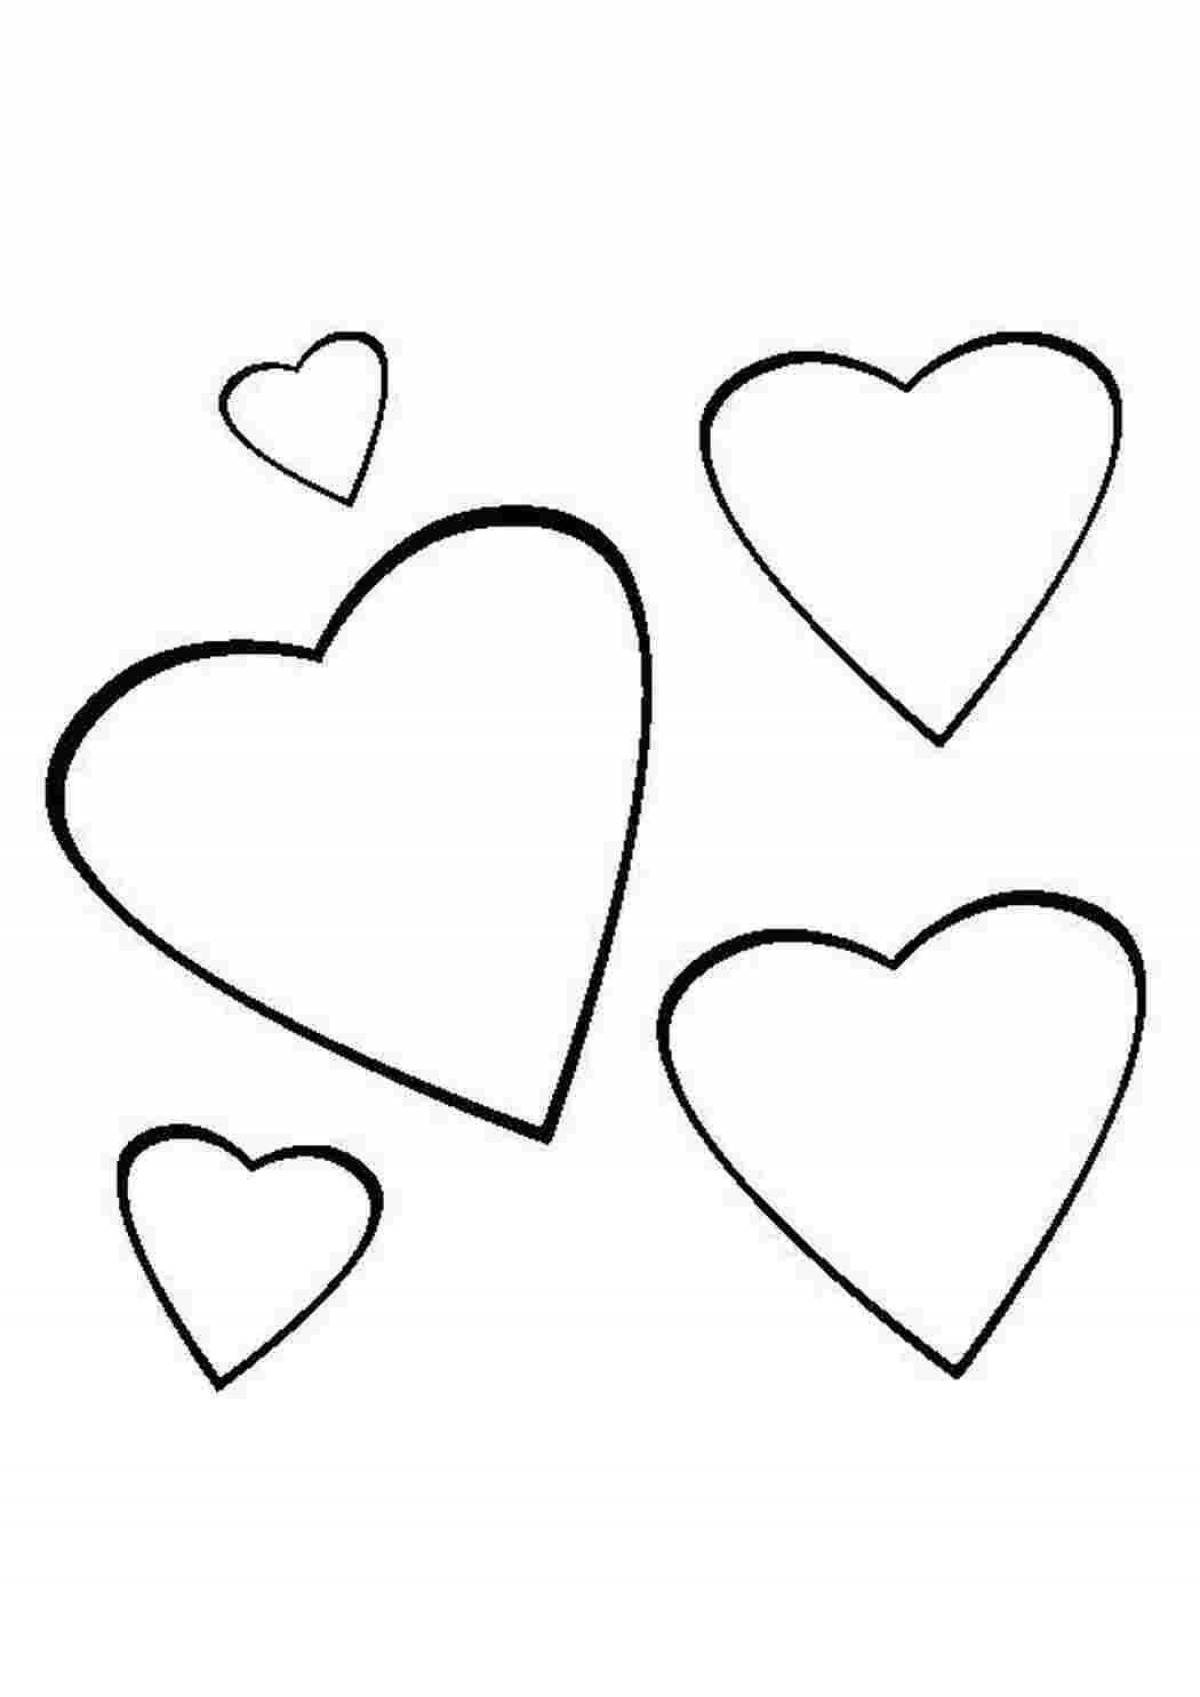 Play heart coloring page for 3-4 year olds